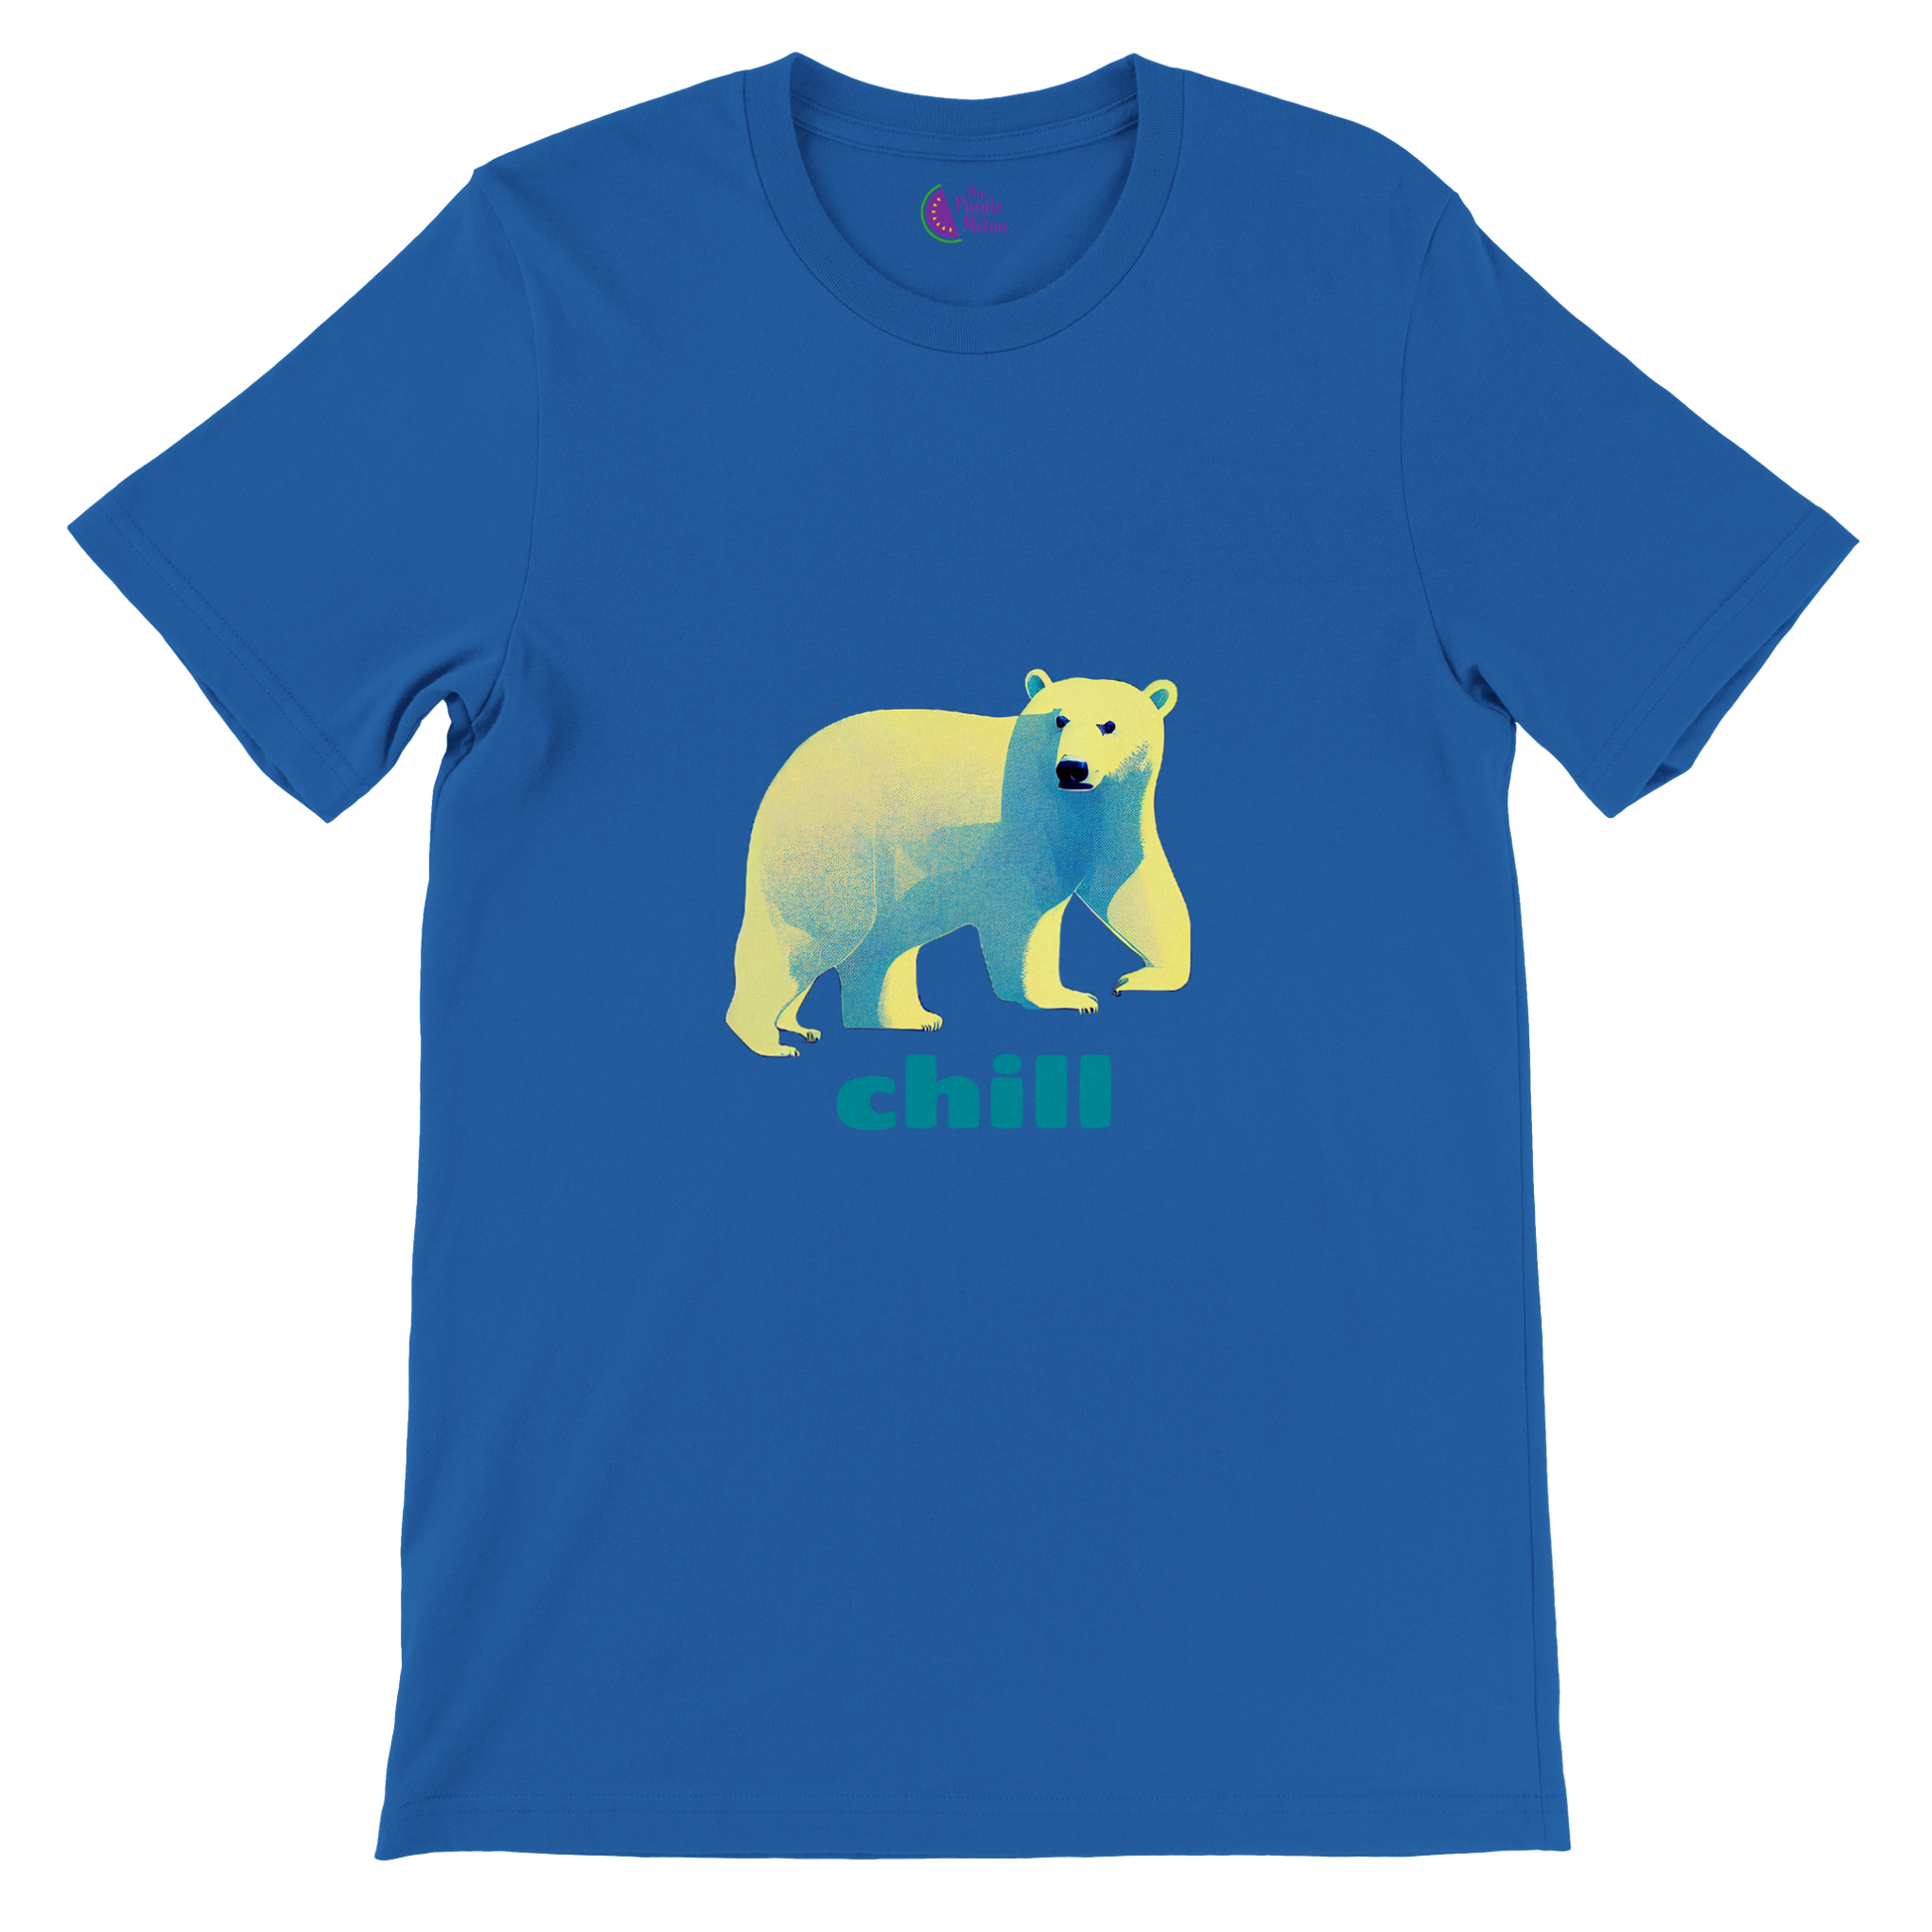 Royal blue t-shirt with a polar bear print with chill caption